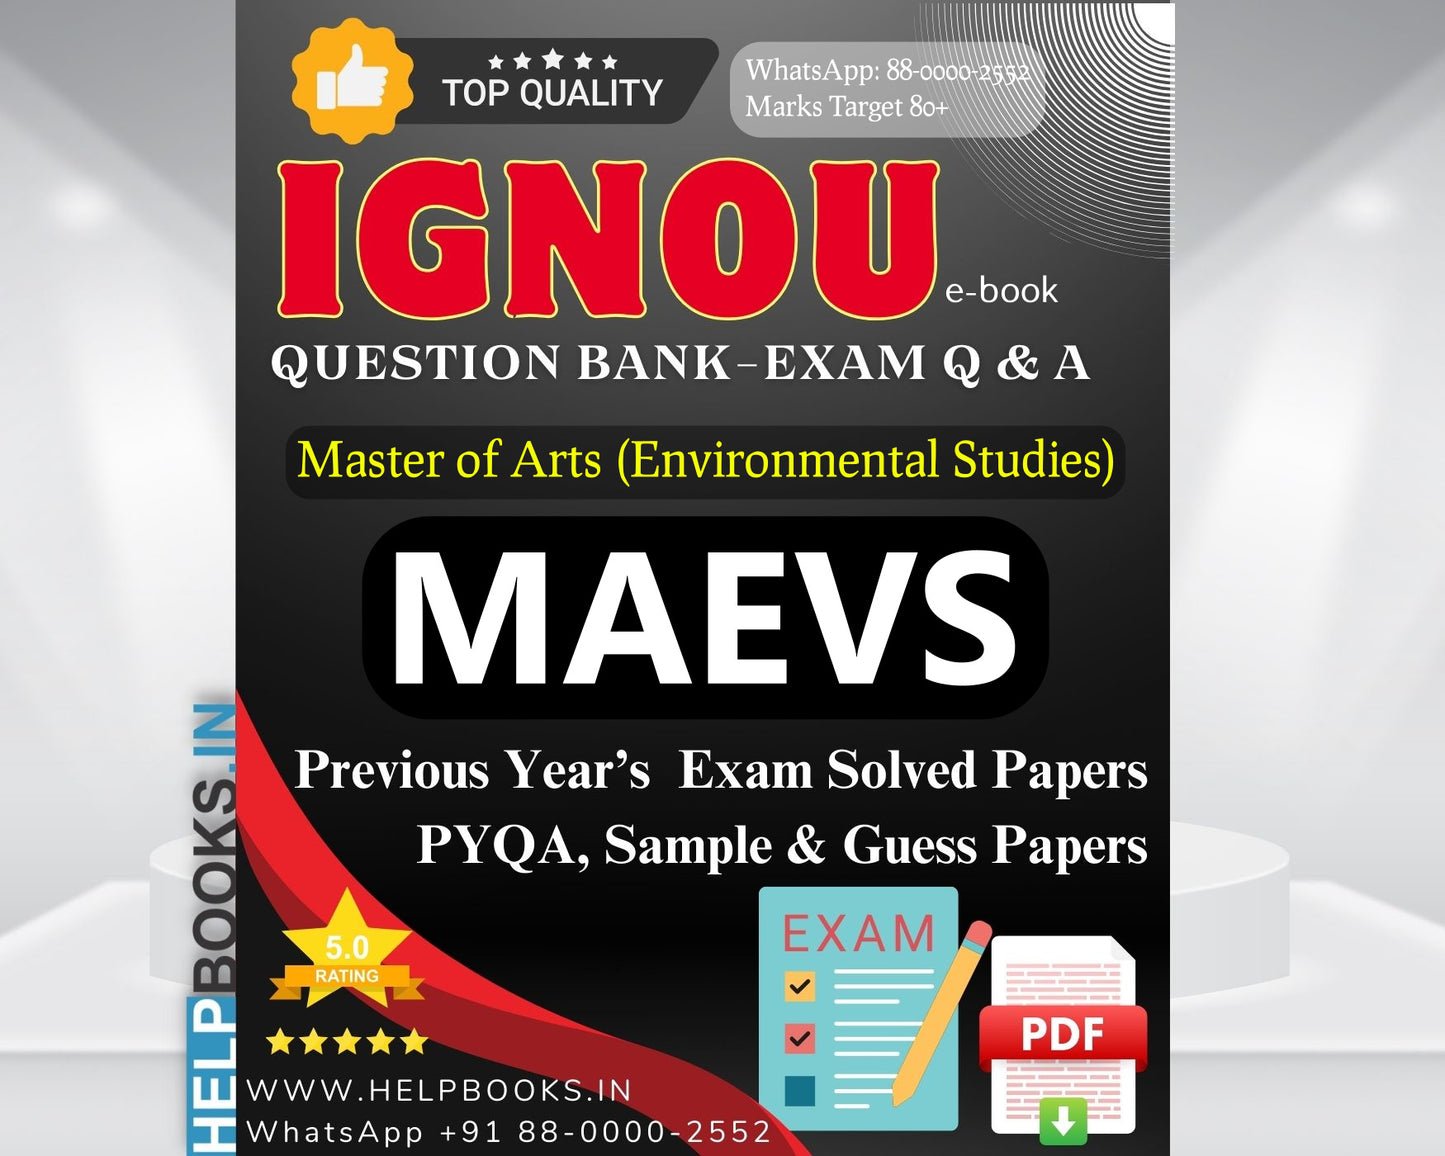 MAEVS IGNOU Exam Combo of 10 Solved Papers: 5 Previous Years' Solved Papers & 5 Sample Guess Papers for Master of Arts Environmental Studies